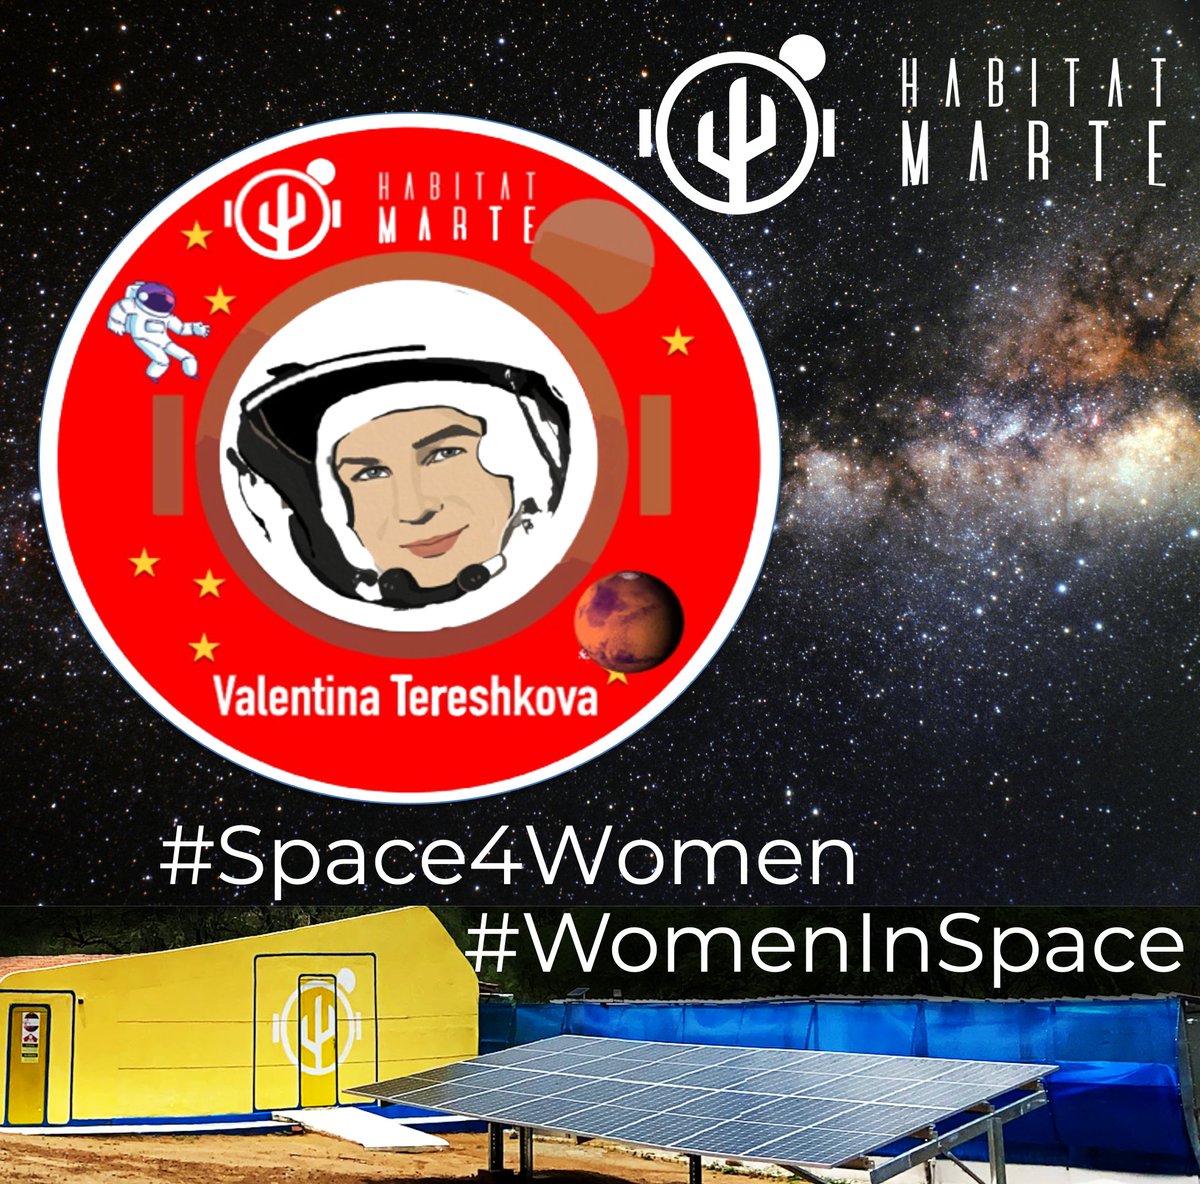 June 13 and 14, 2023 happens @HabitatMarte #space M 145 #ValentinaTereshkova . Tereshkova is the first cosmonaut and the first woman to have gone into space, on June 16, 1963. Participants are from  @ufrnbr @ifrnoficial_ . #WomeninSpace @Space4WomenOOSA  is celebrated by @UNOOSA